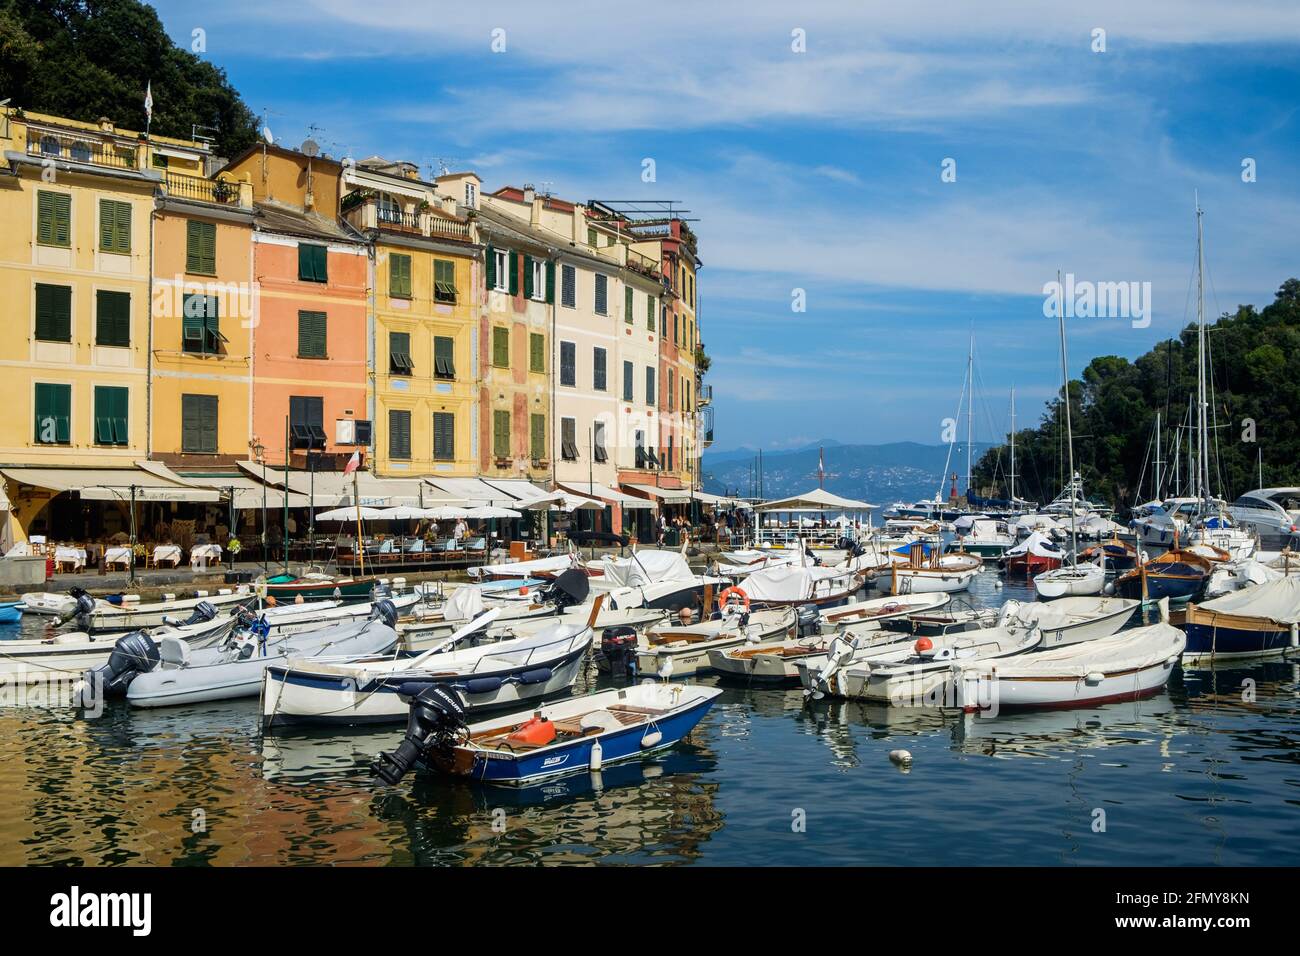 Colorful houses border the small harbour of Portofino. Recreational boats lie on the water. Stock Photo